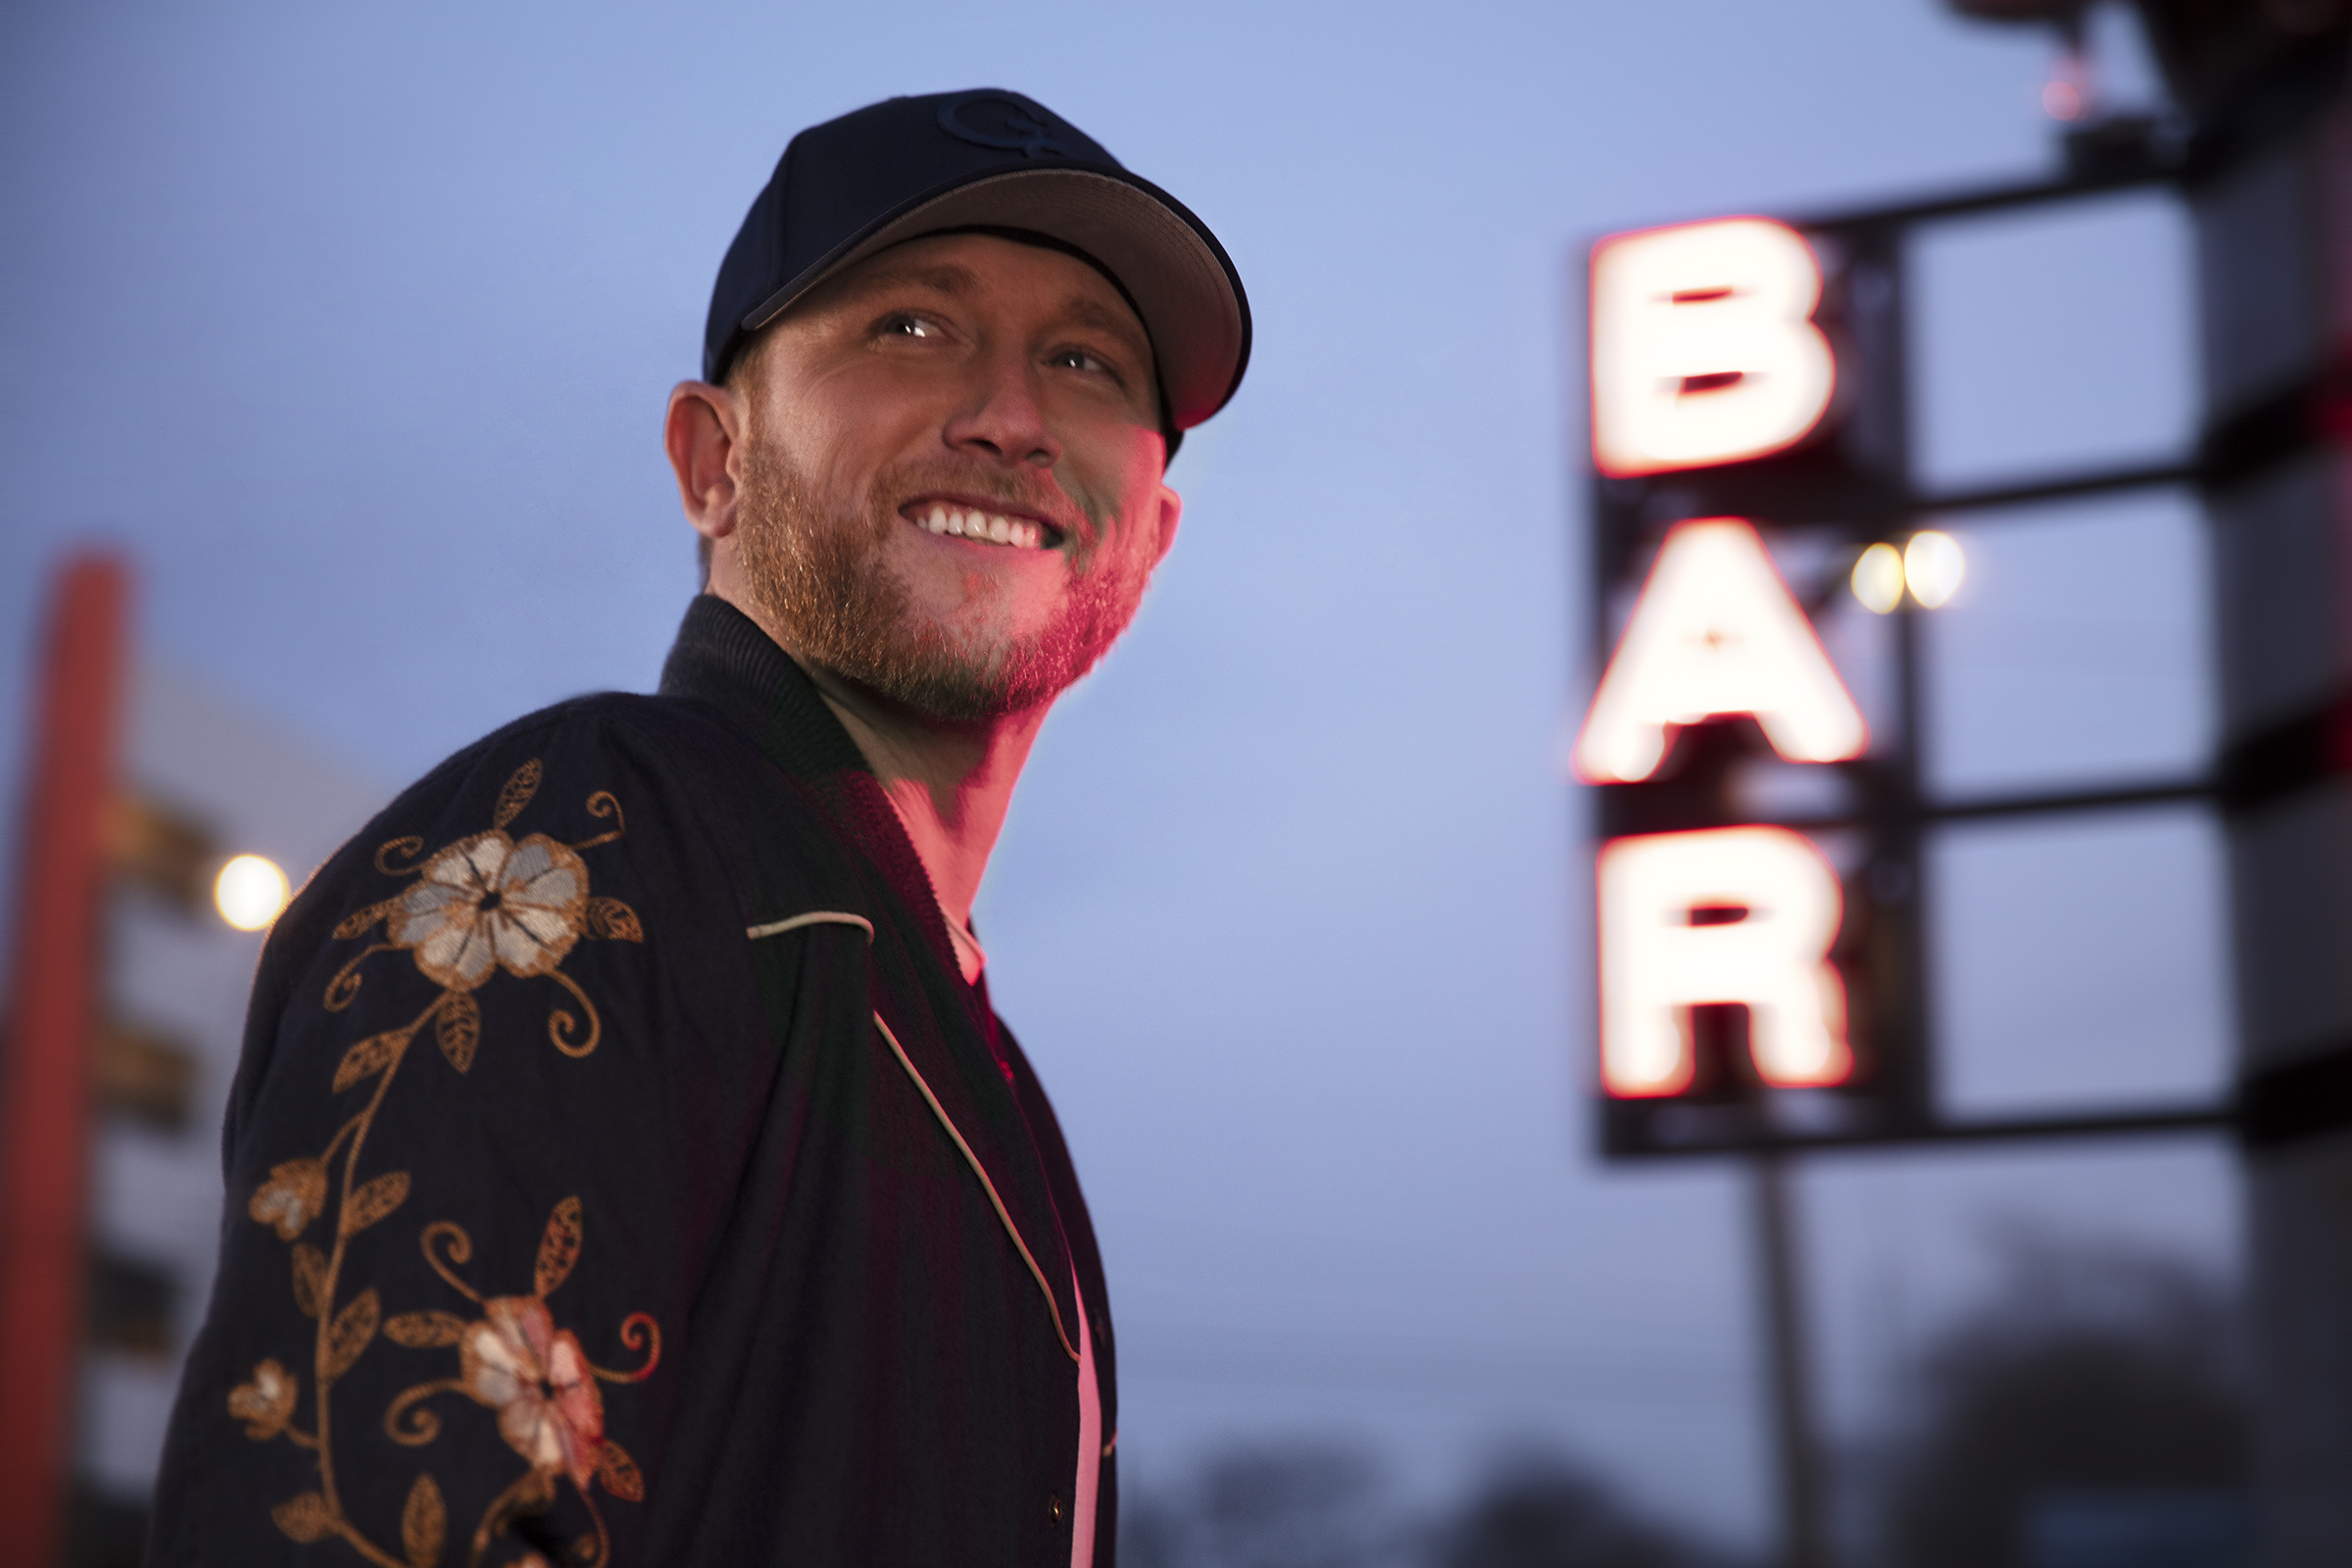 COLE SWINDELL’S “SINGLE SATURDAY NIGHT” BECOMES HIS 10TH CAREER NO. 1 SINGLE